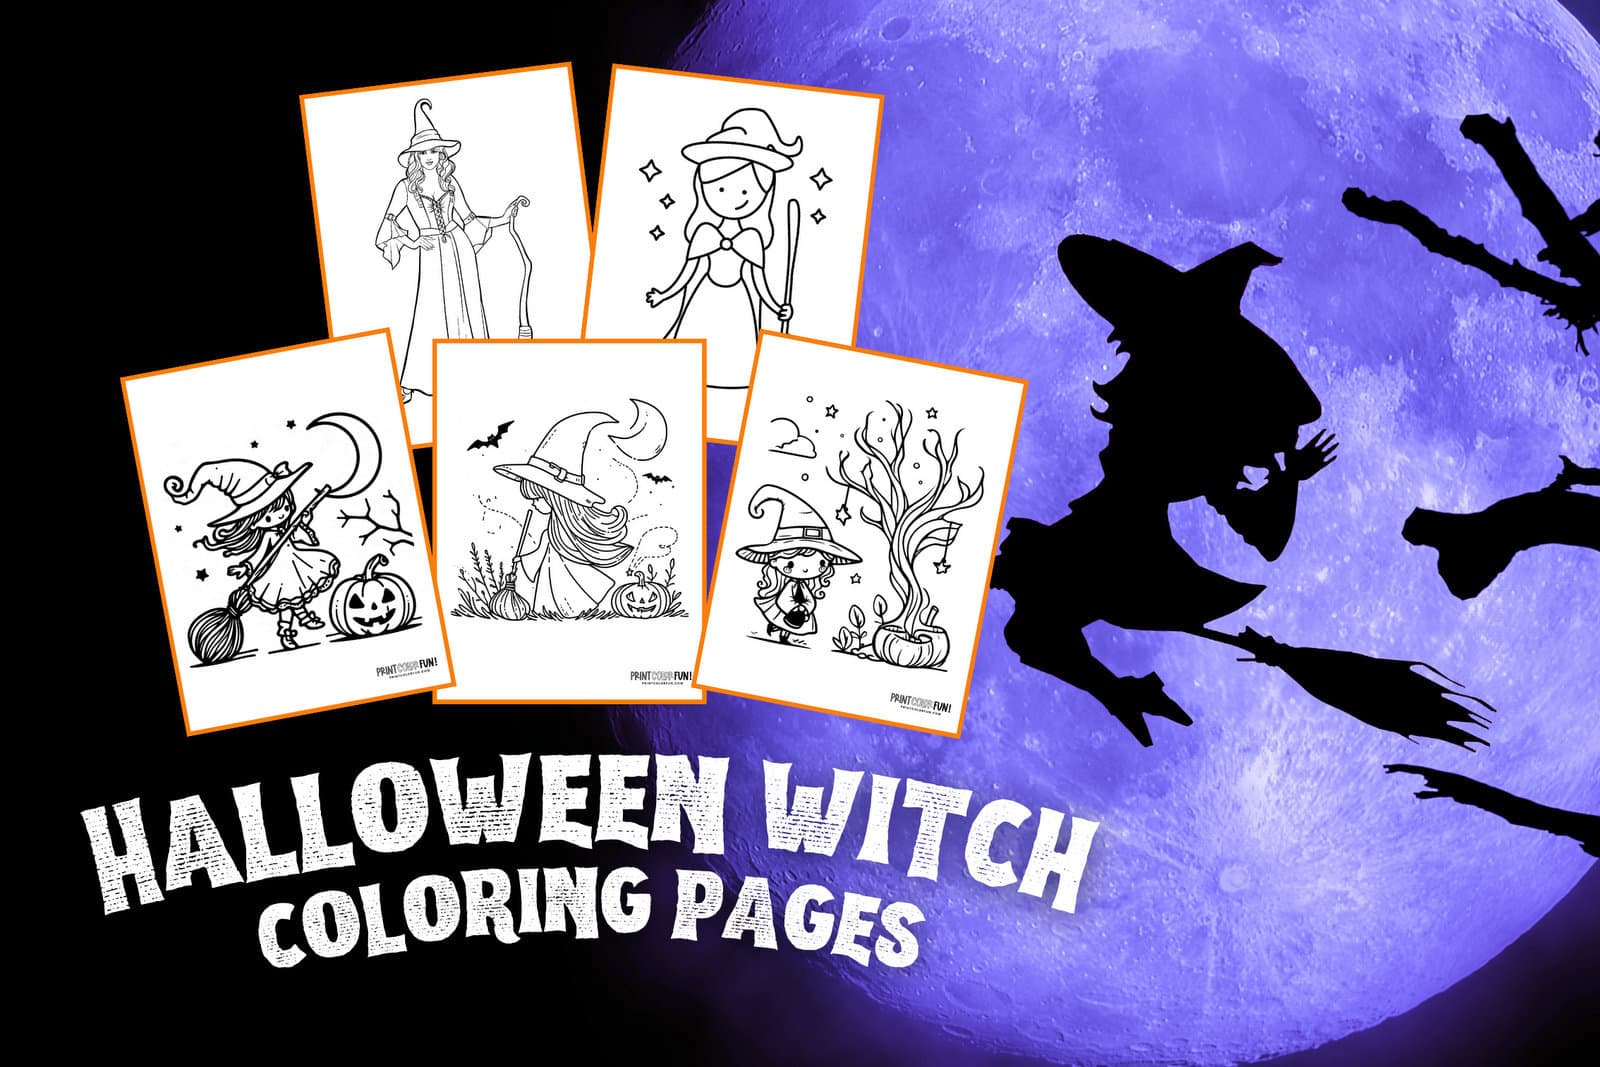 Witch coloring pages for Halloween from PrintColorFun com